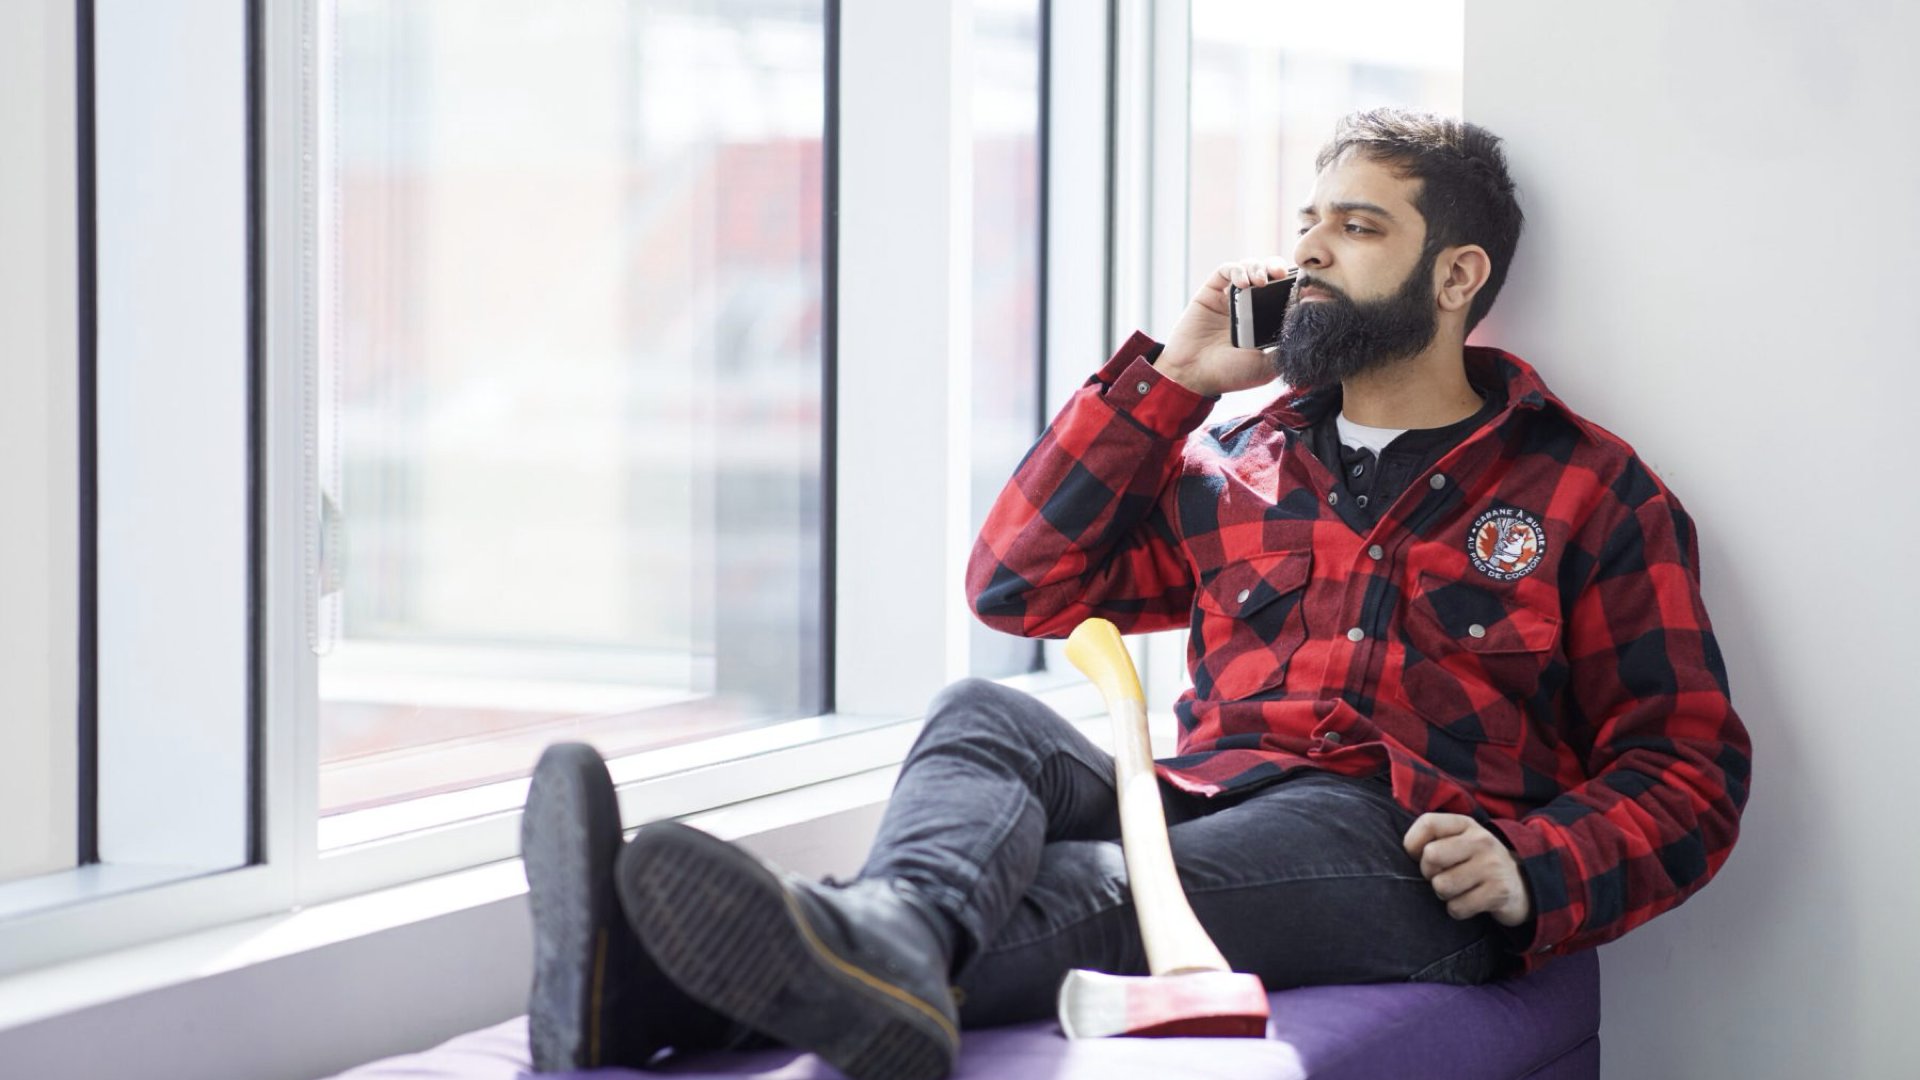 A very Canadian person lazing back on a chair talking on a cell phone with an axe to his side. Photo credit: CIRA stock photos.